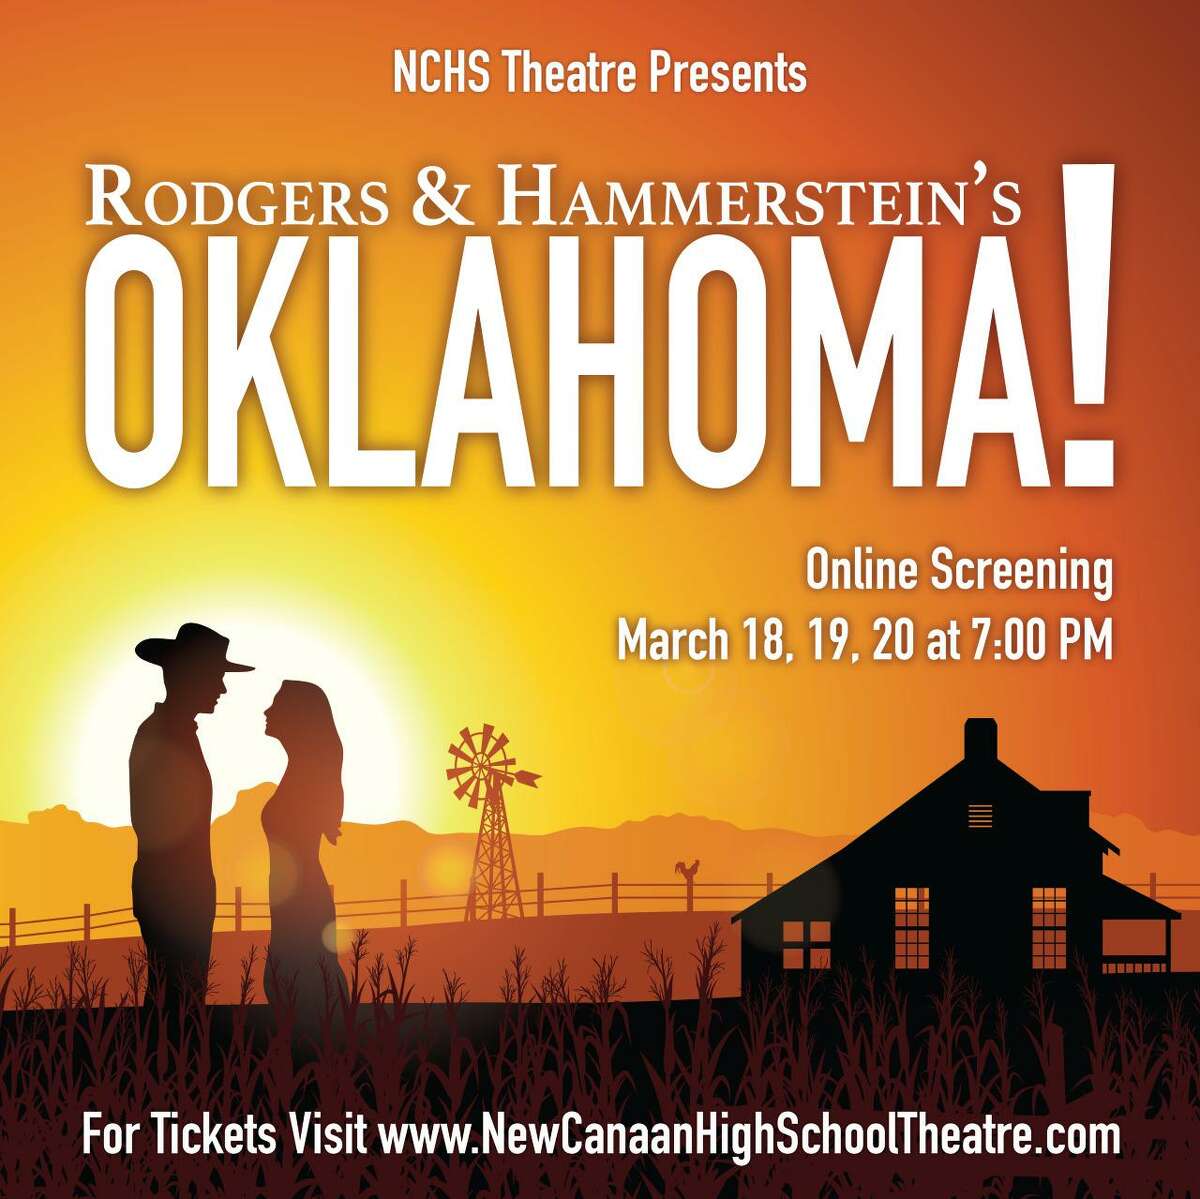 The New Canaan High School Theatre Department is presenting Rodgers & Hammerstein’s musical “Oklahoma!” in online screenings March 18, March 19 and March 20 at 7 p.m. Due to COVID-19, the performances will be able to be streamed through phones, tablets, laptops, or smart televisions. Pictured is a flyer for the performances.